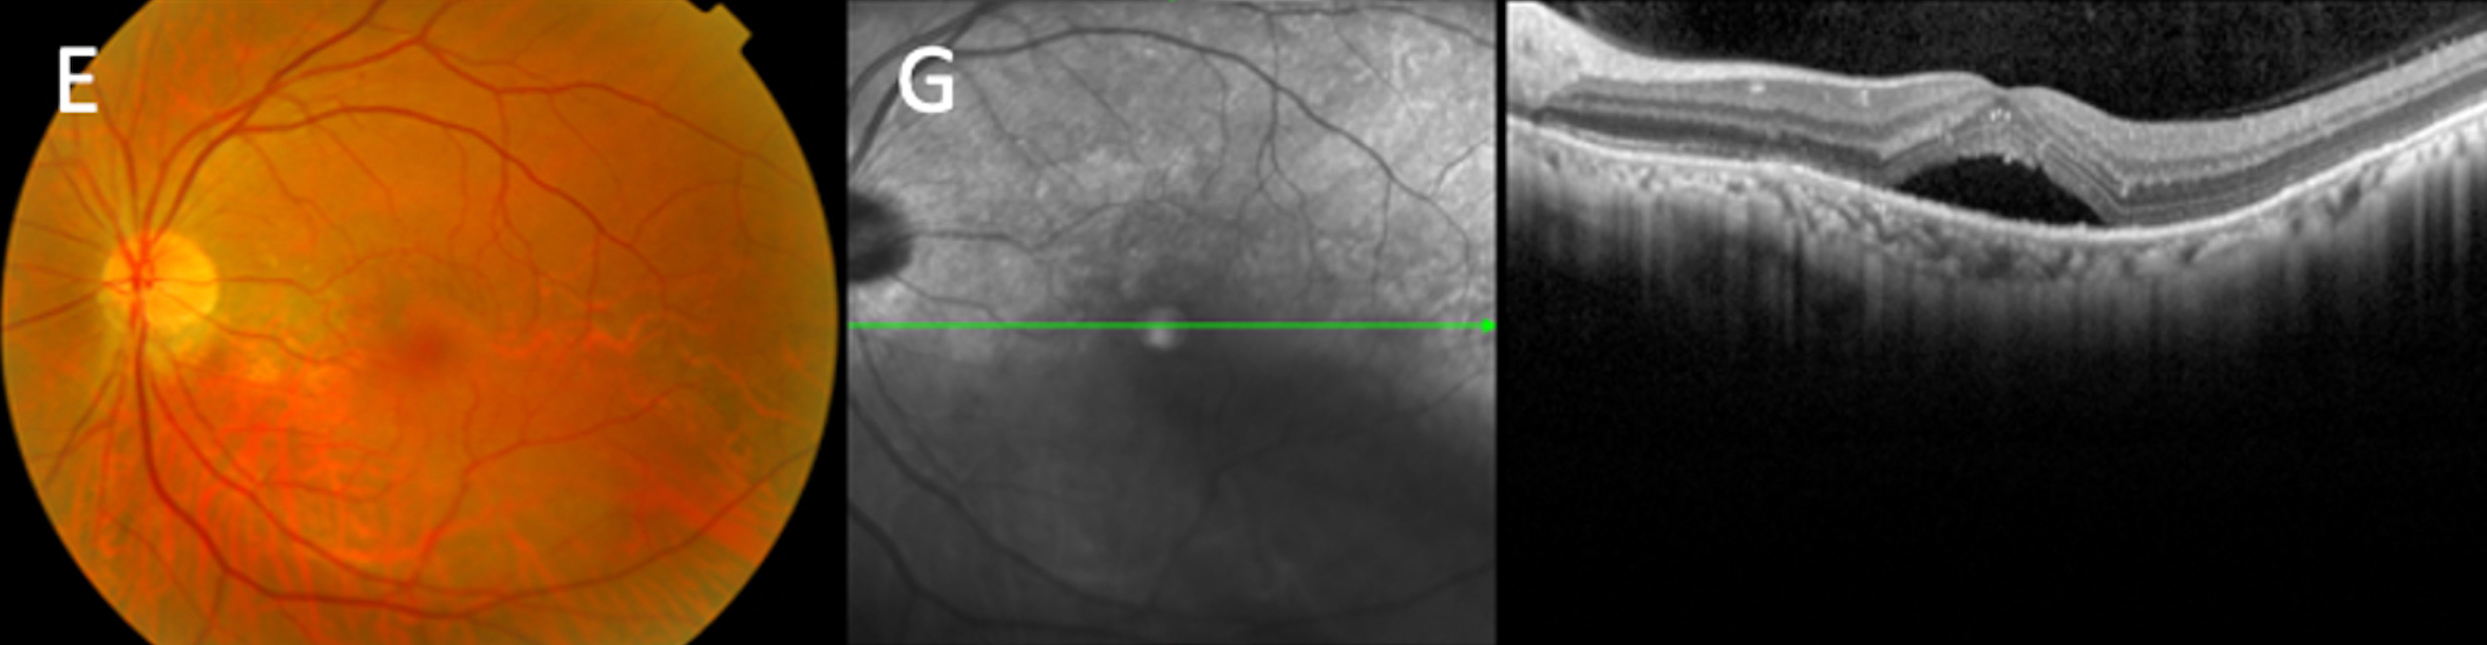 Treatment modalities in patients with staphyloma-induced serous maculopathy showed no significant change in BCVA vs. untreated eyes, suggesting a wait-and-see approach may be preferred. 